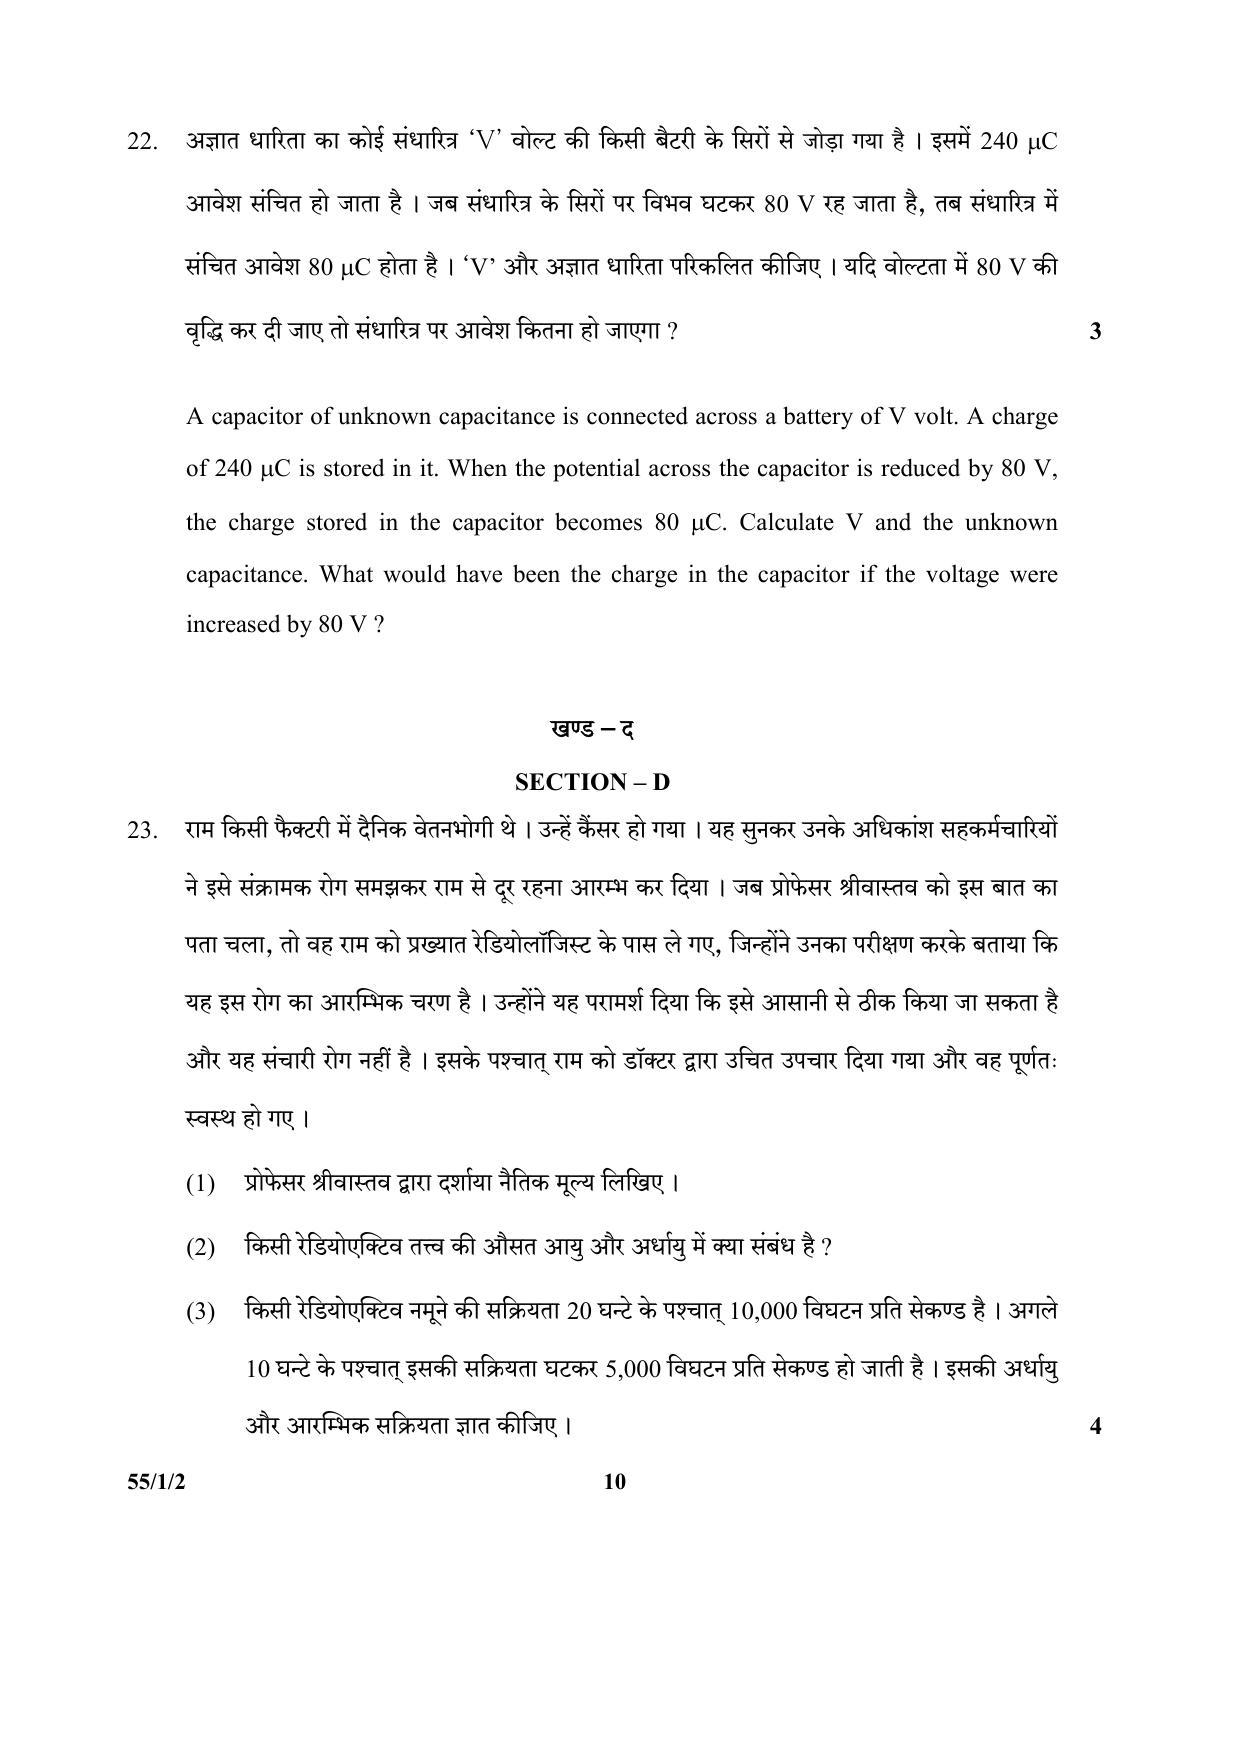 CBSE Class 12 55-1-2 (Physics) 2017-comptt Question Paper - Page 10